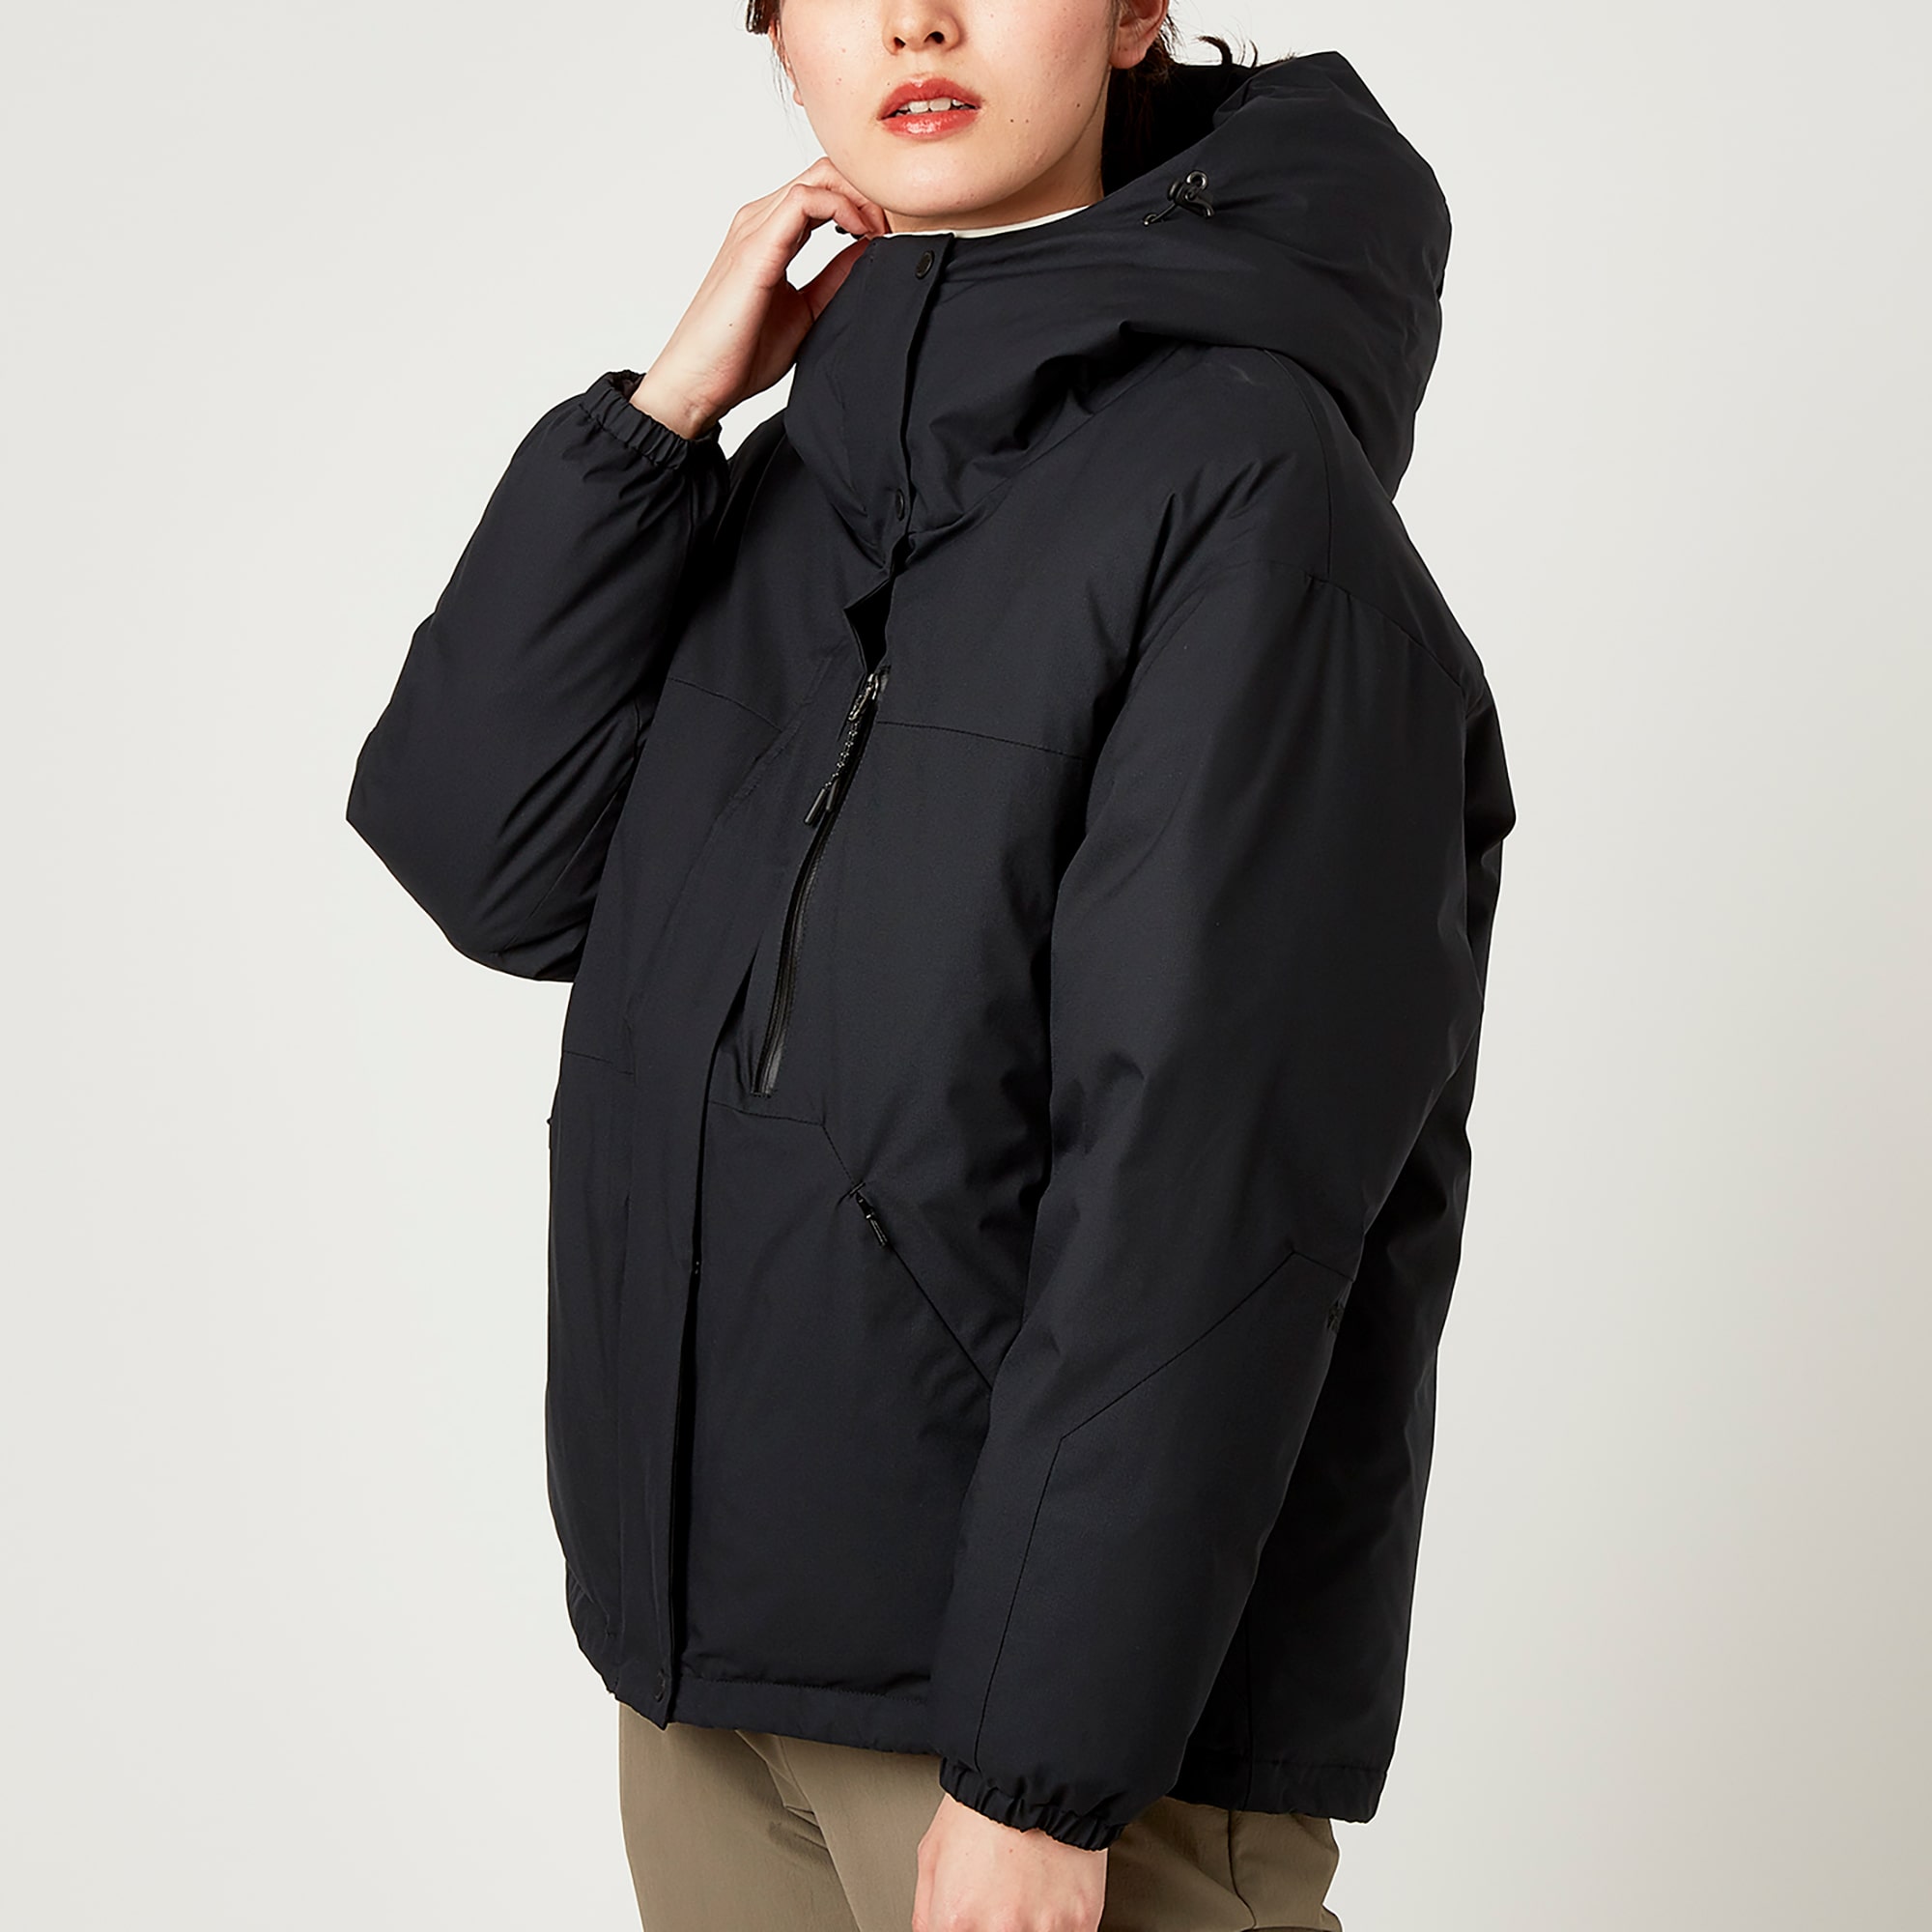 GORE-TEX PRODUCTS COLLECTION｜Go to by mizuno｜ミズノ公式オンライン